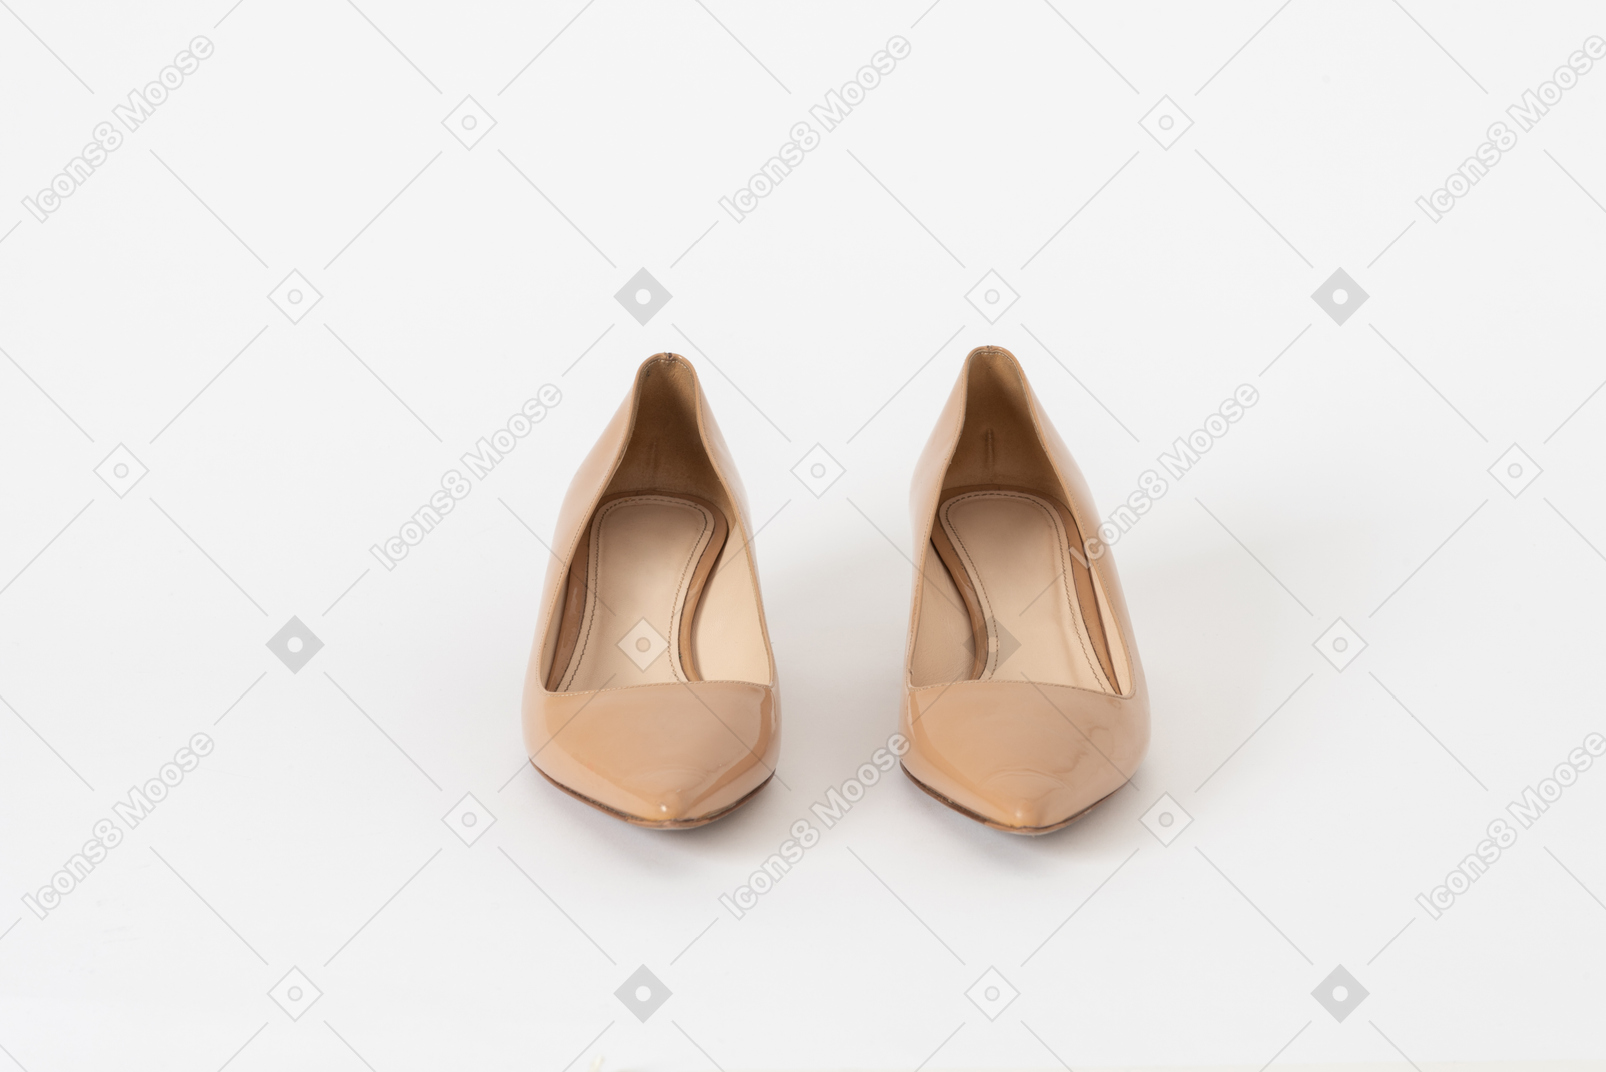 A front shot of a pair of beige lacquer court shoes